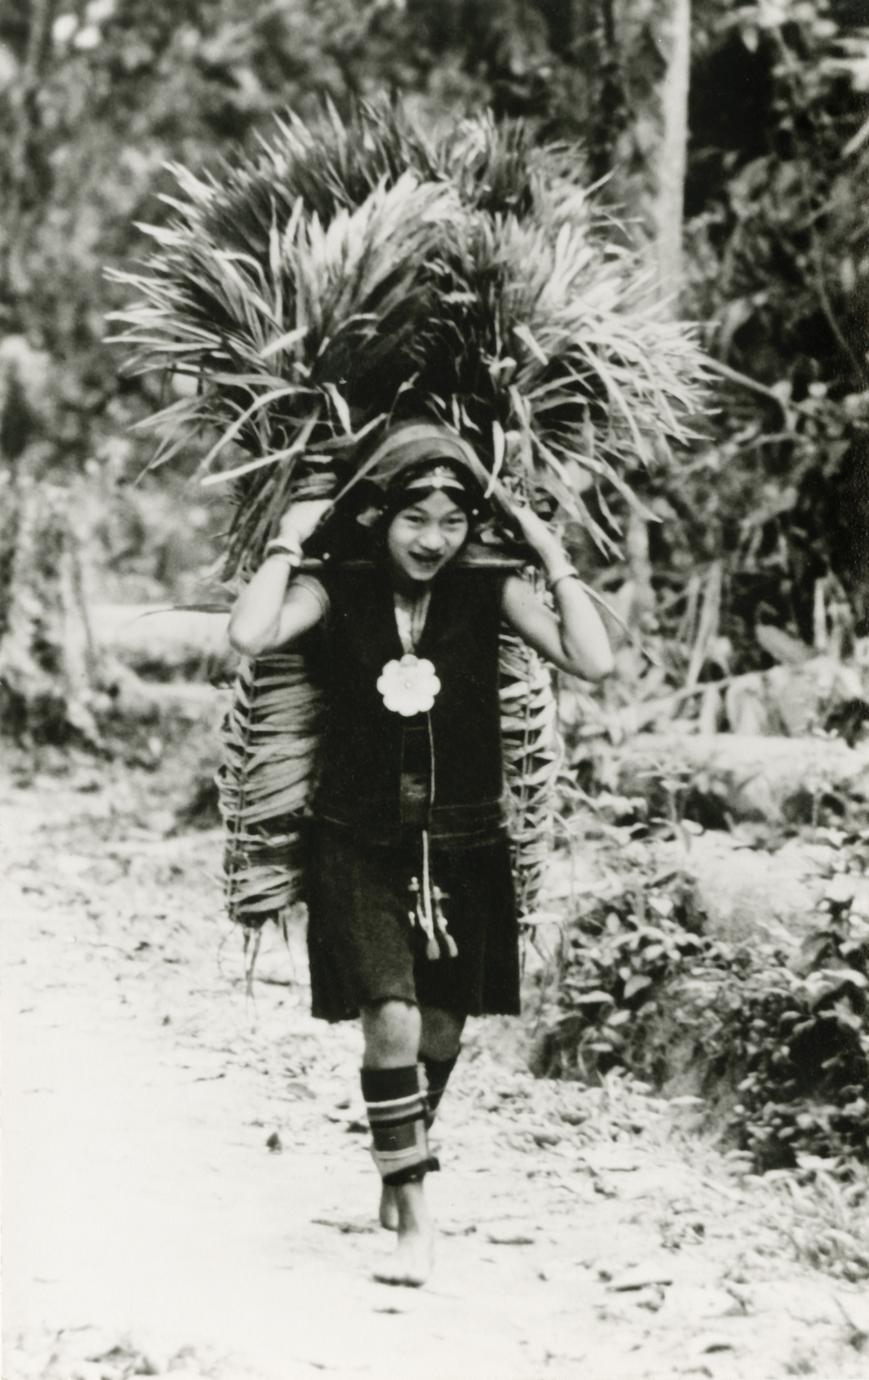 Akha woman carrying palm leaves near the village of Phate in Houa Khong Province